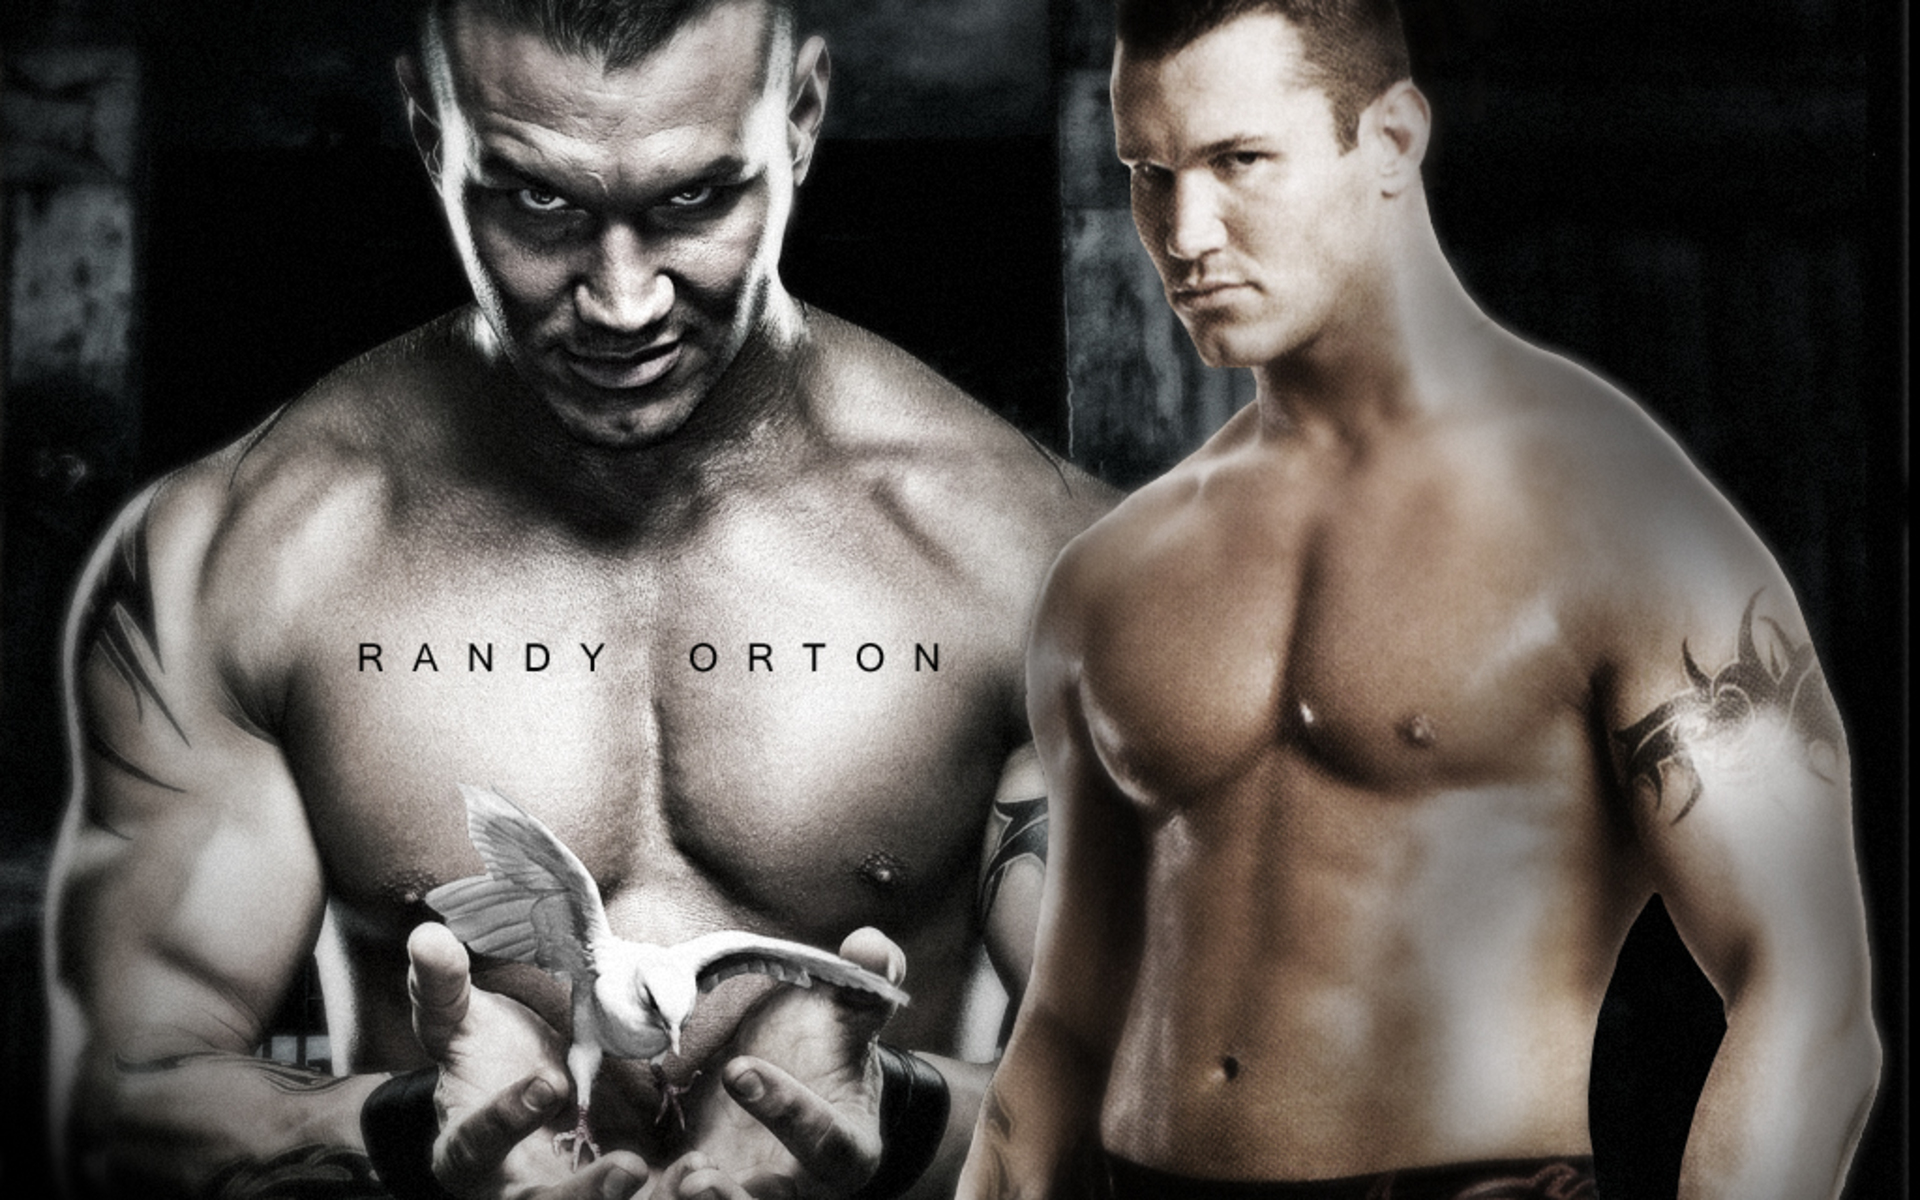 pictures-of-barry-orton